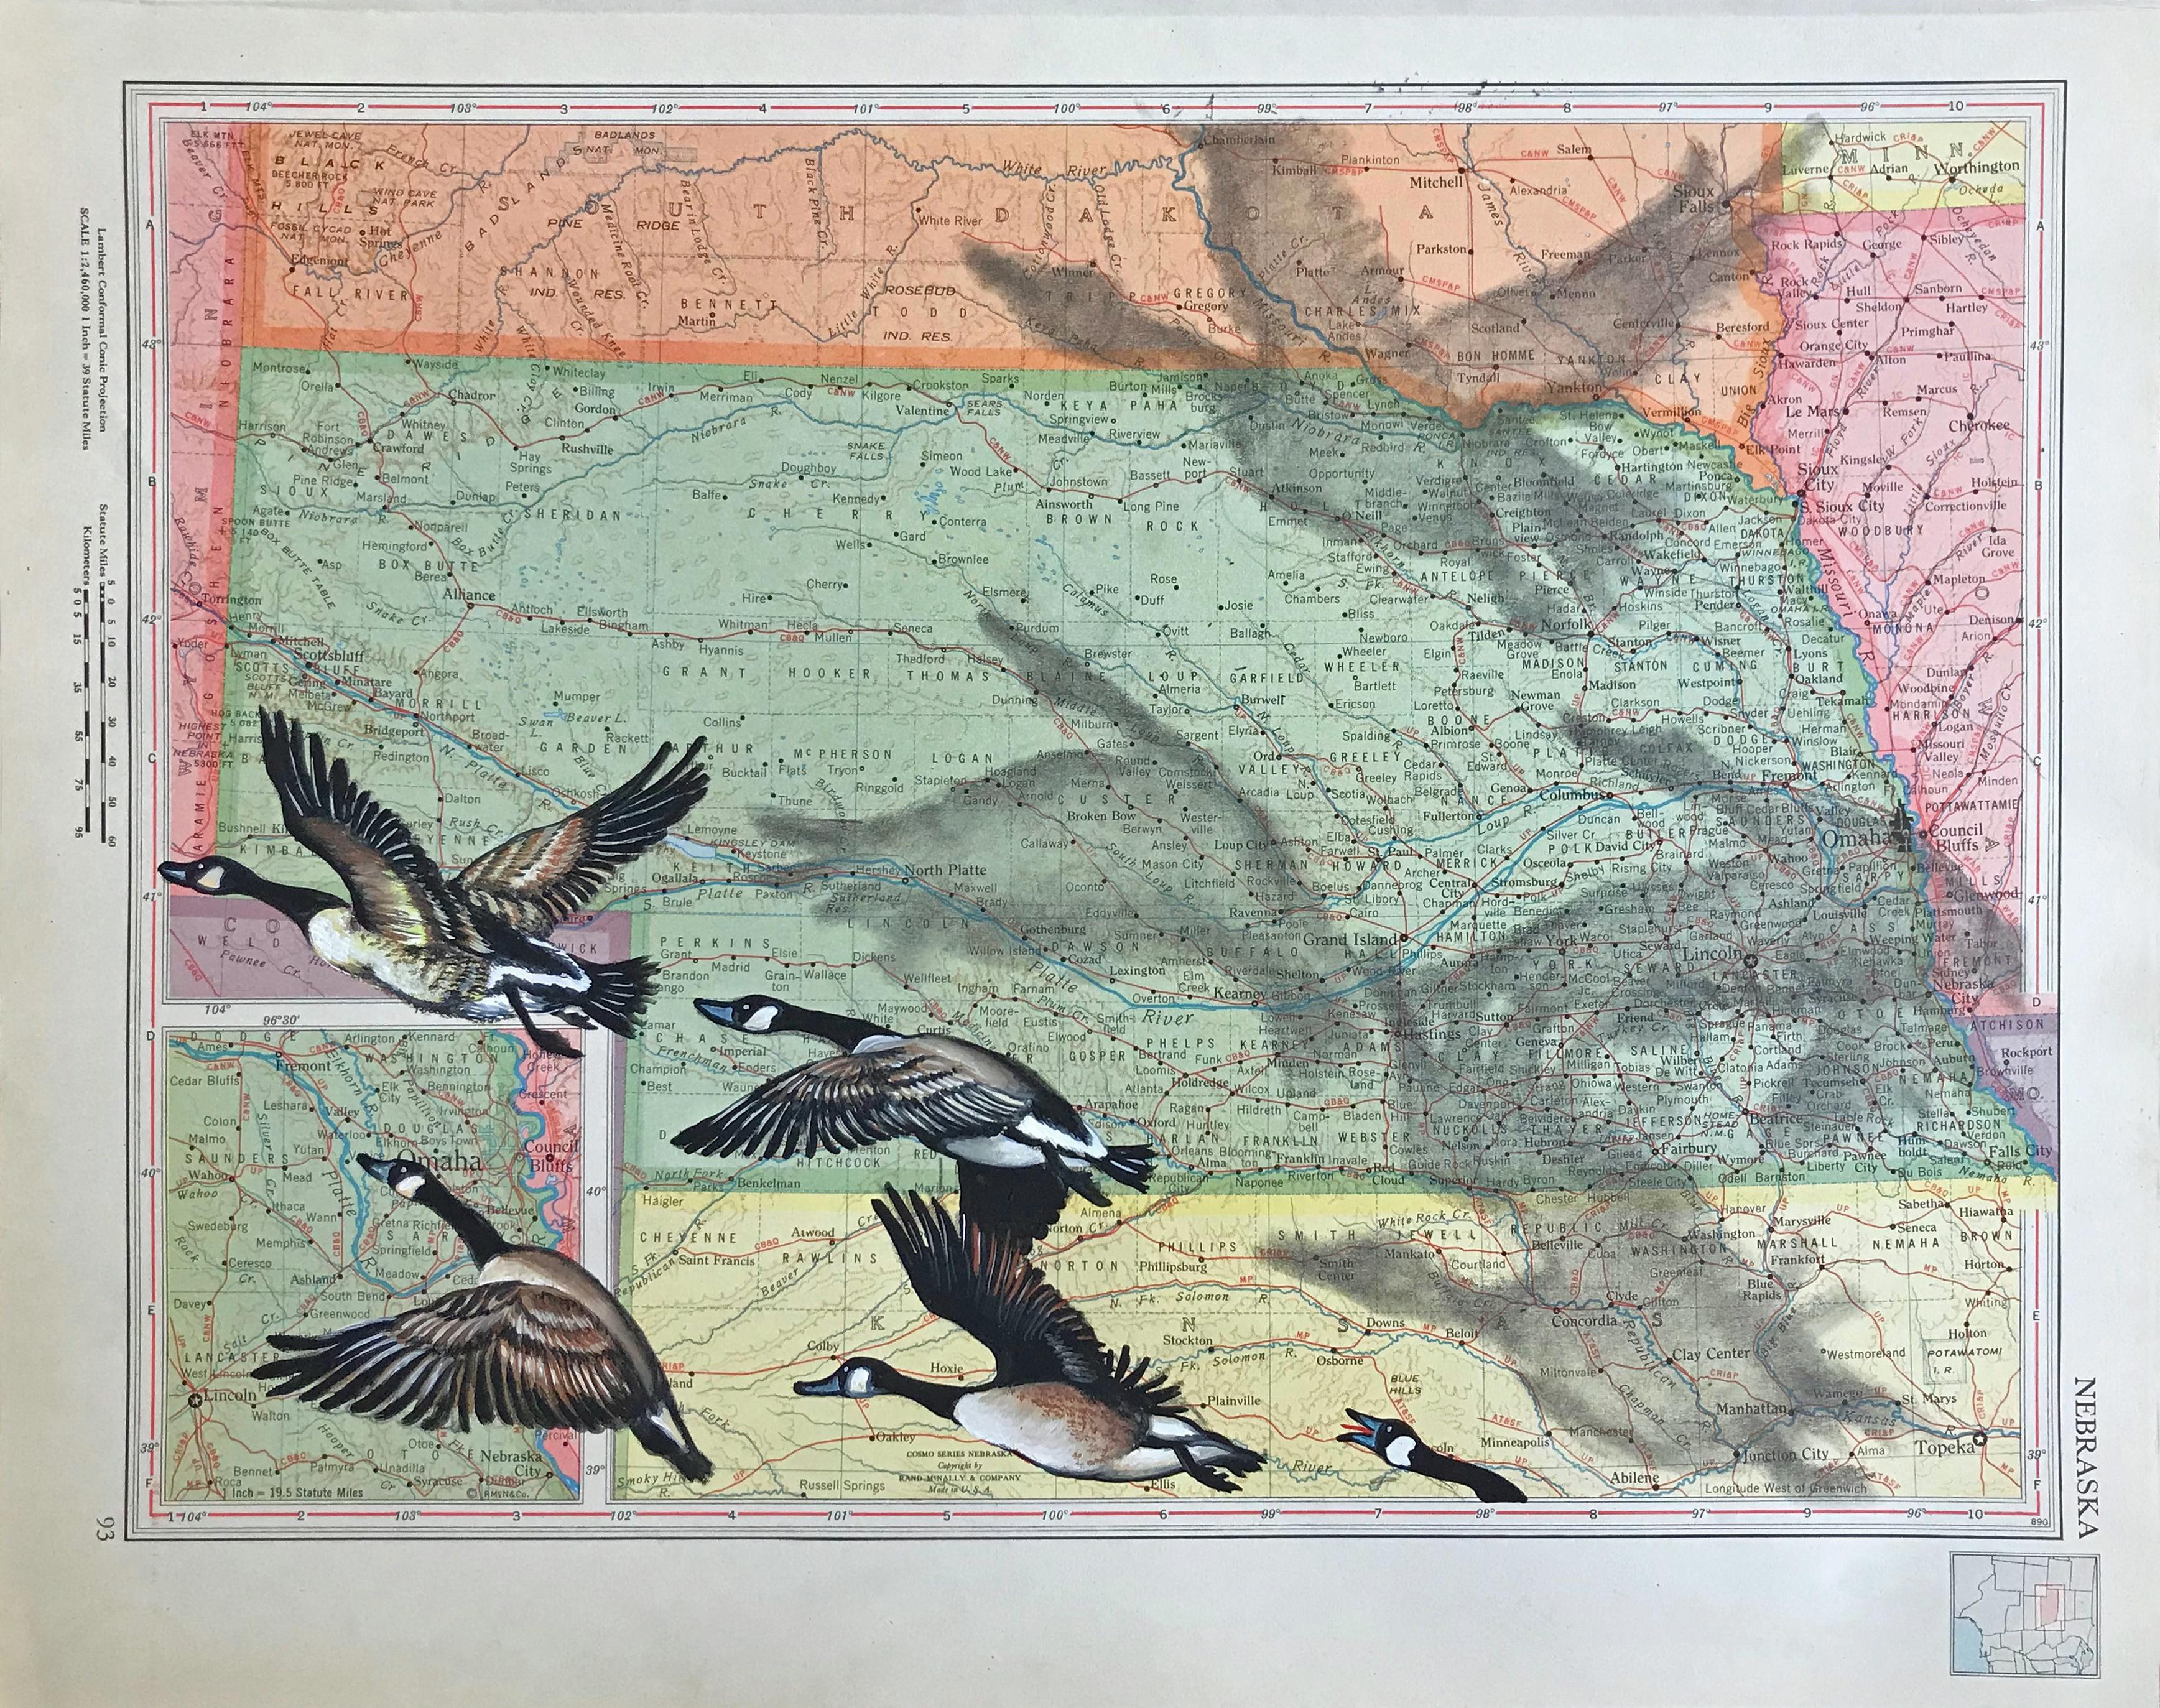 Carol Wax Animal Art - Fly-Over State, Gouache, watercolor and pencil 1946 Rand-McNally World Atlas Map